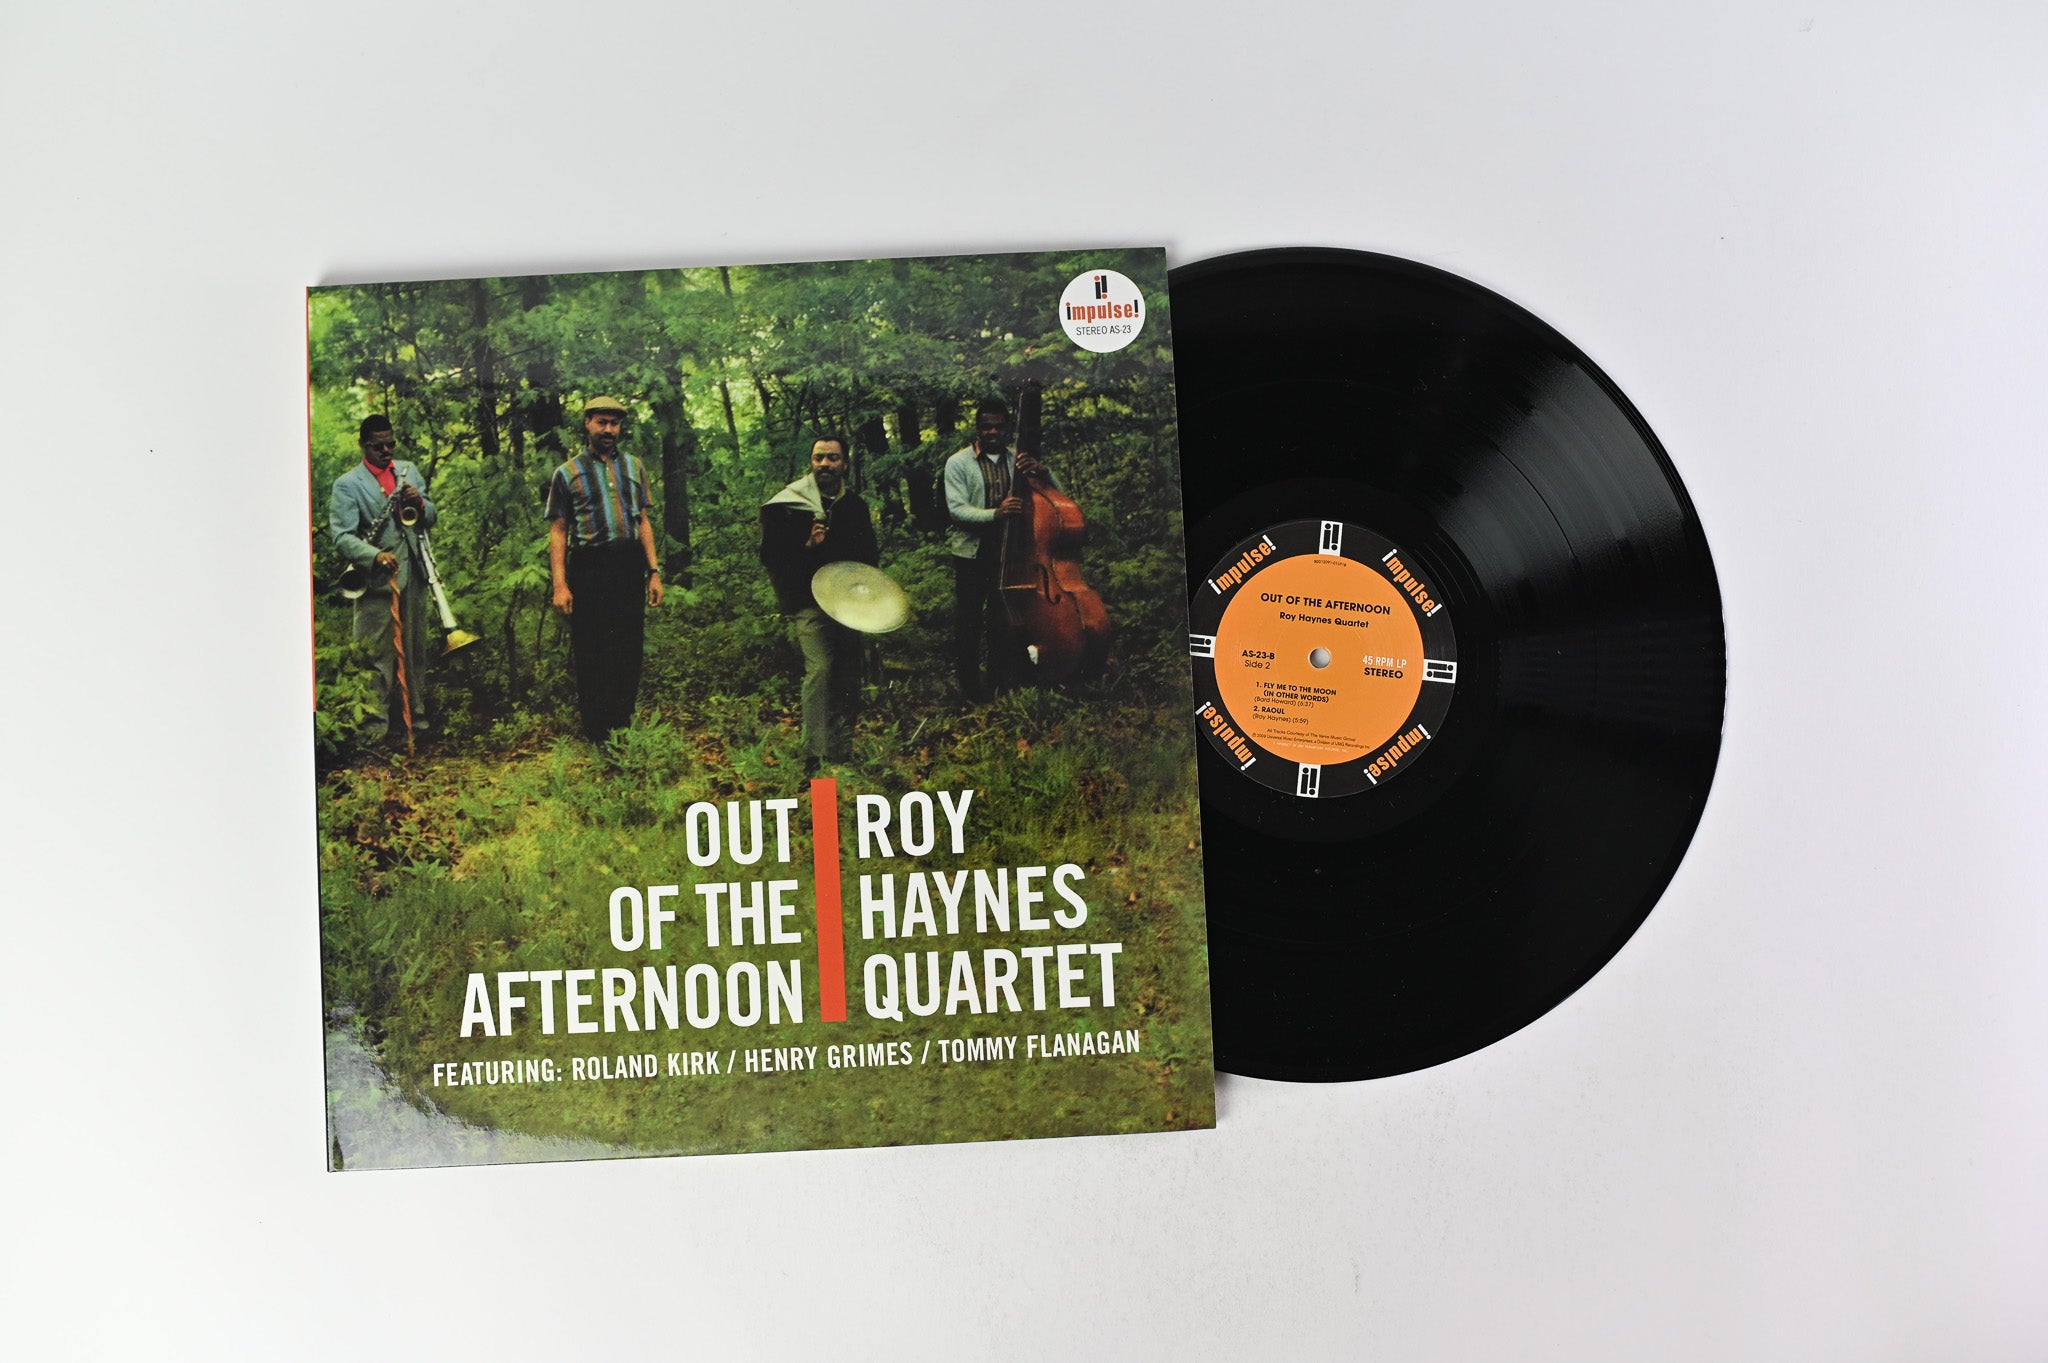 Roy Haynes Quartet - Out Of The Afternoon on Analogue Productions 45 RPM